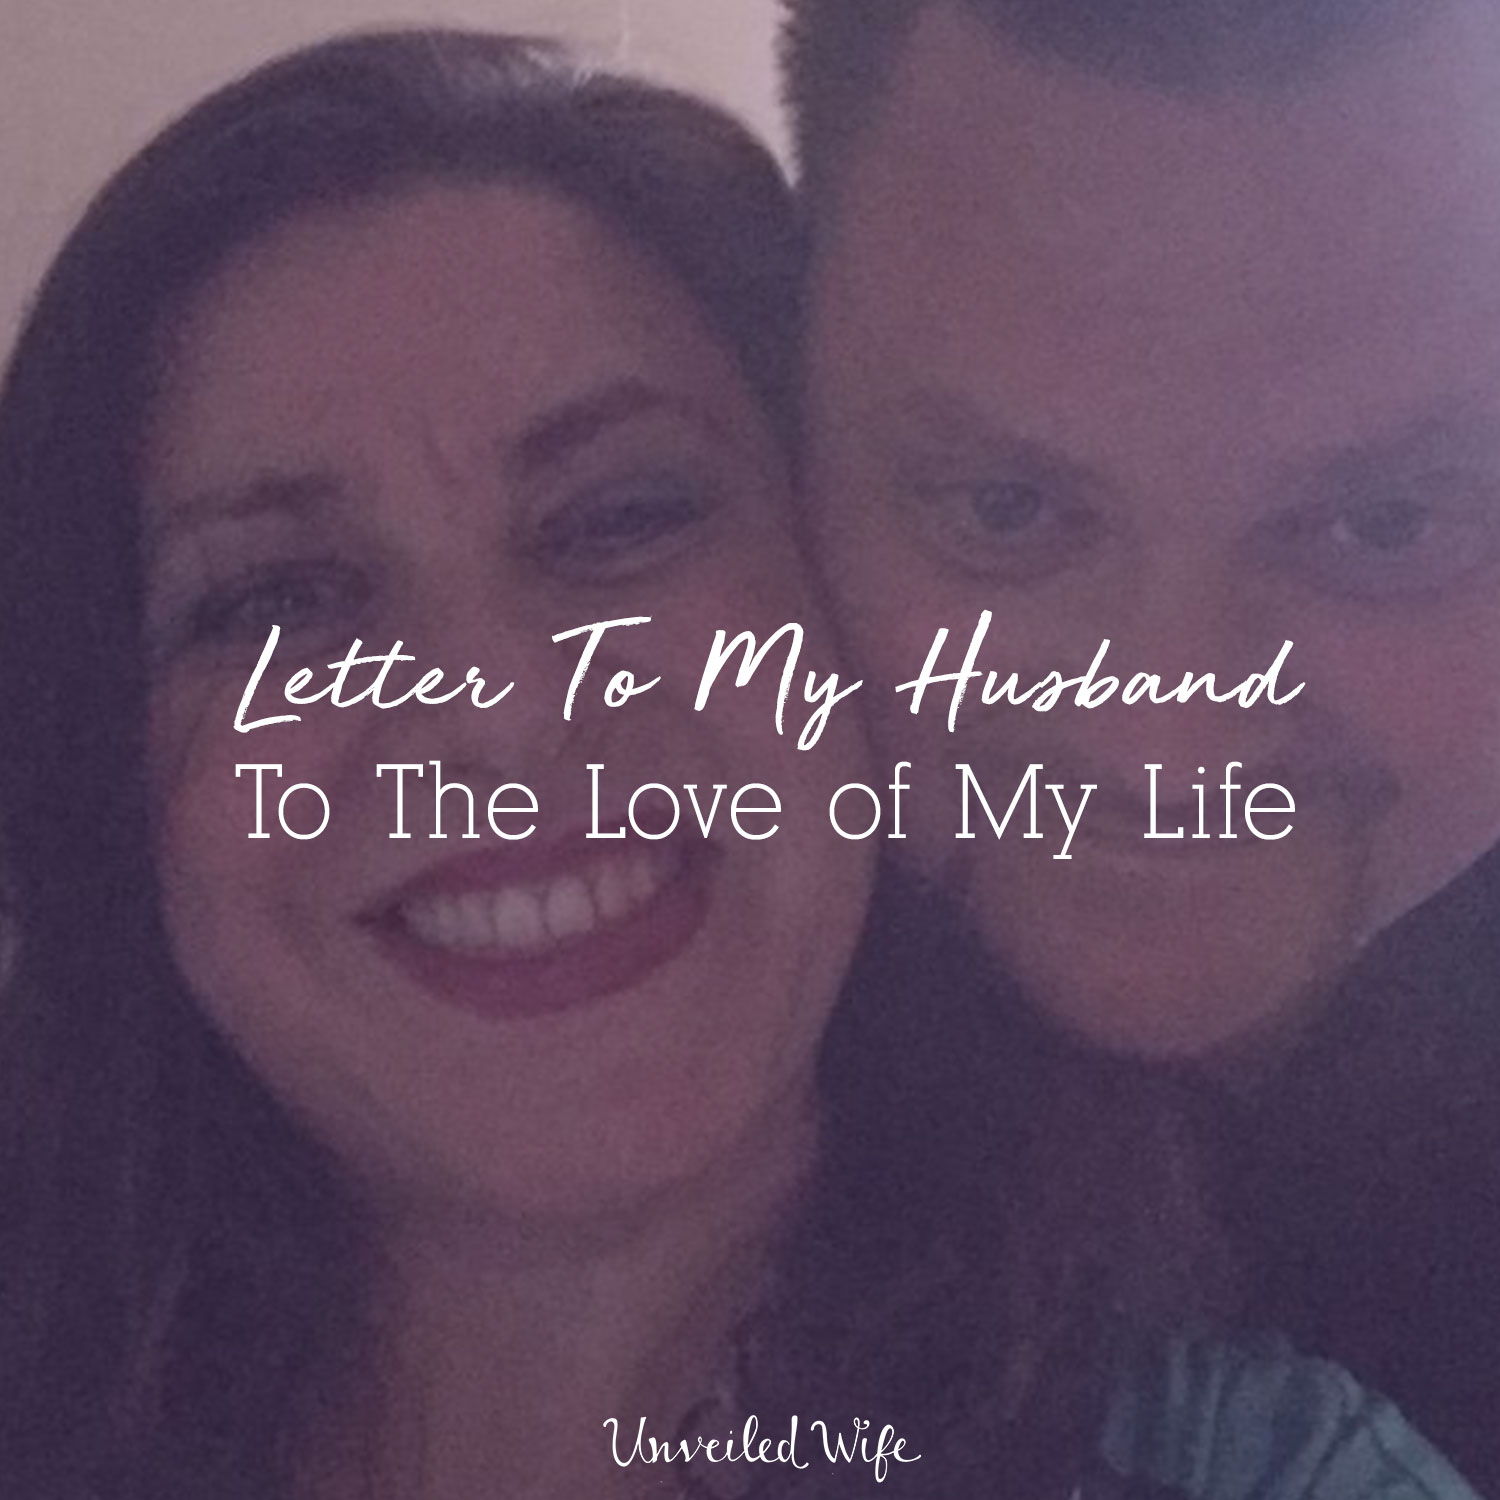 Letter To My Husband: To The Love Of My Life